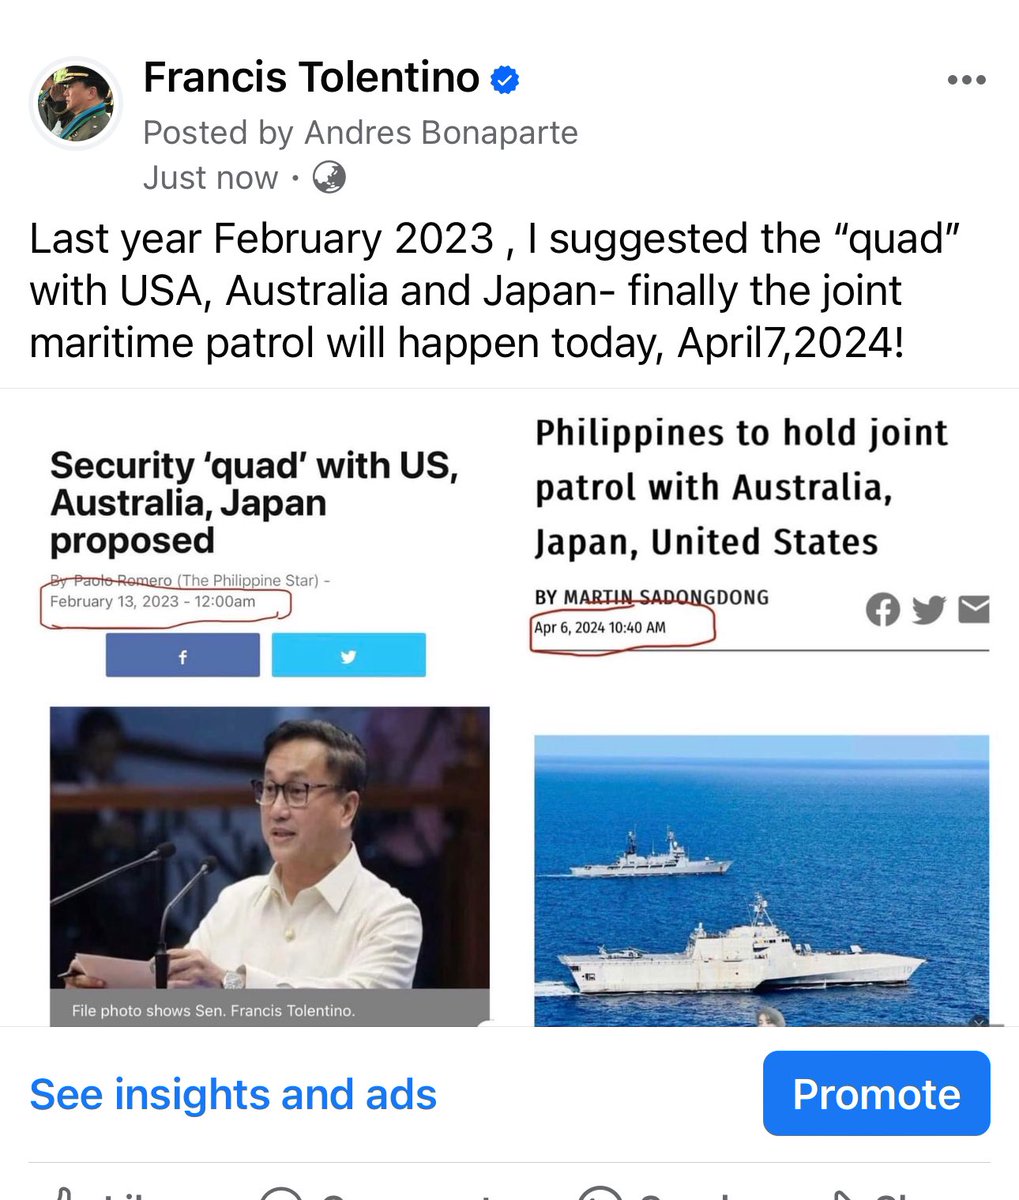 Joint maritime patrol in West Philippine Sea starts today (April 7,2024)- modesty aside,I remember proposing this last year to ensure regional stability.